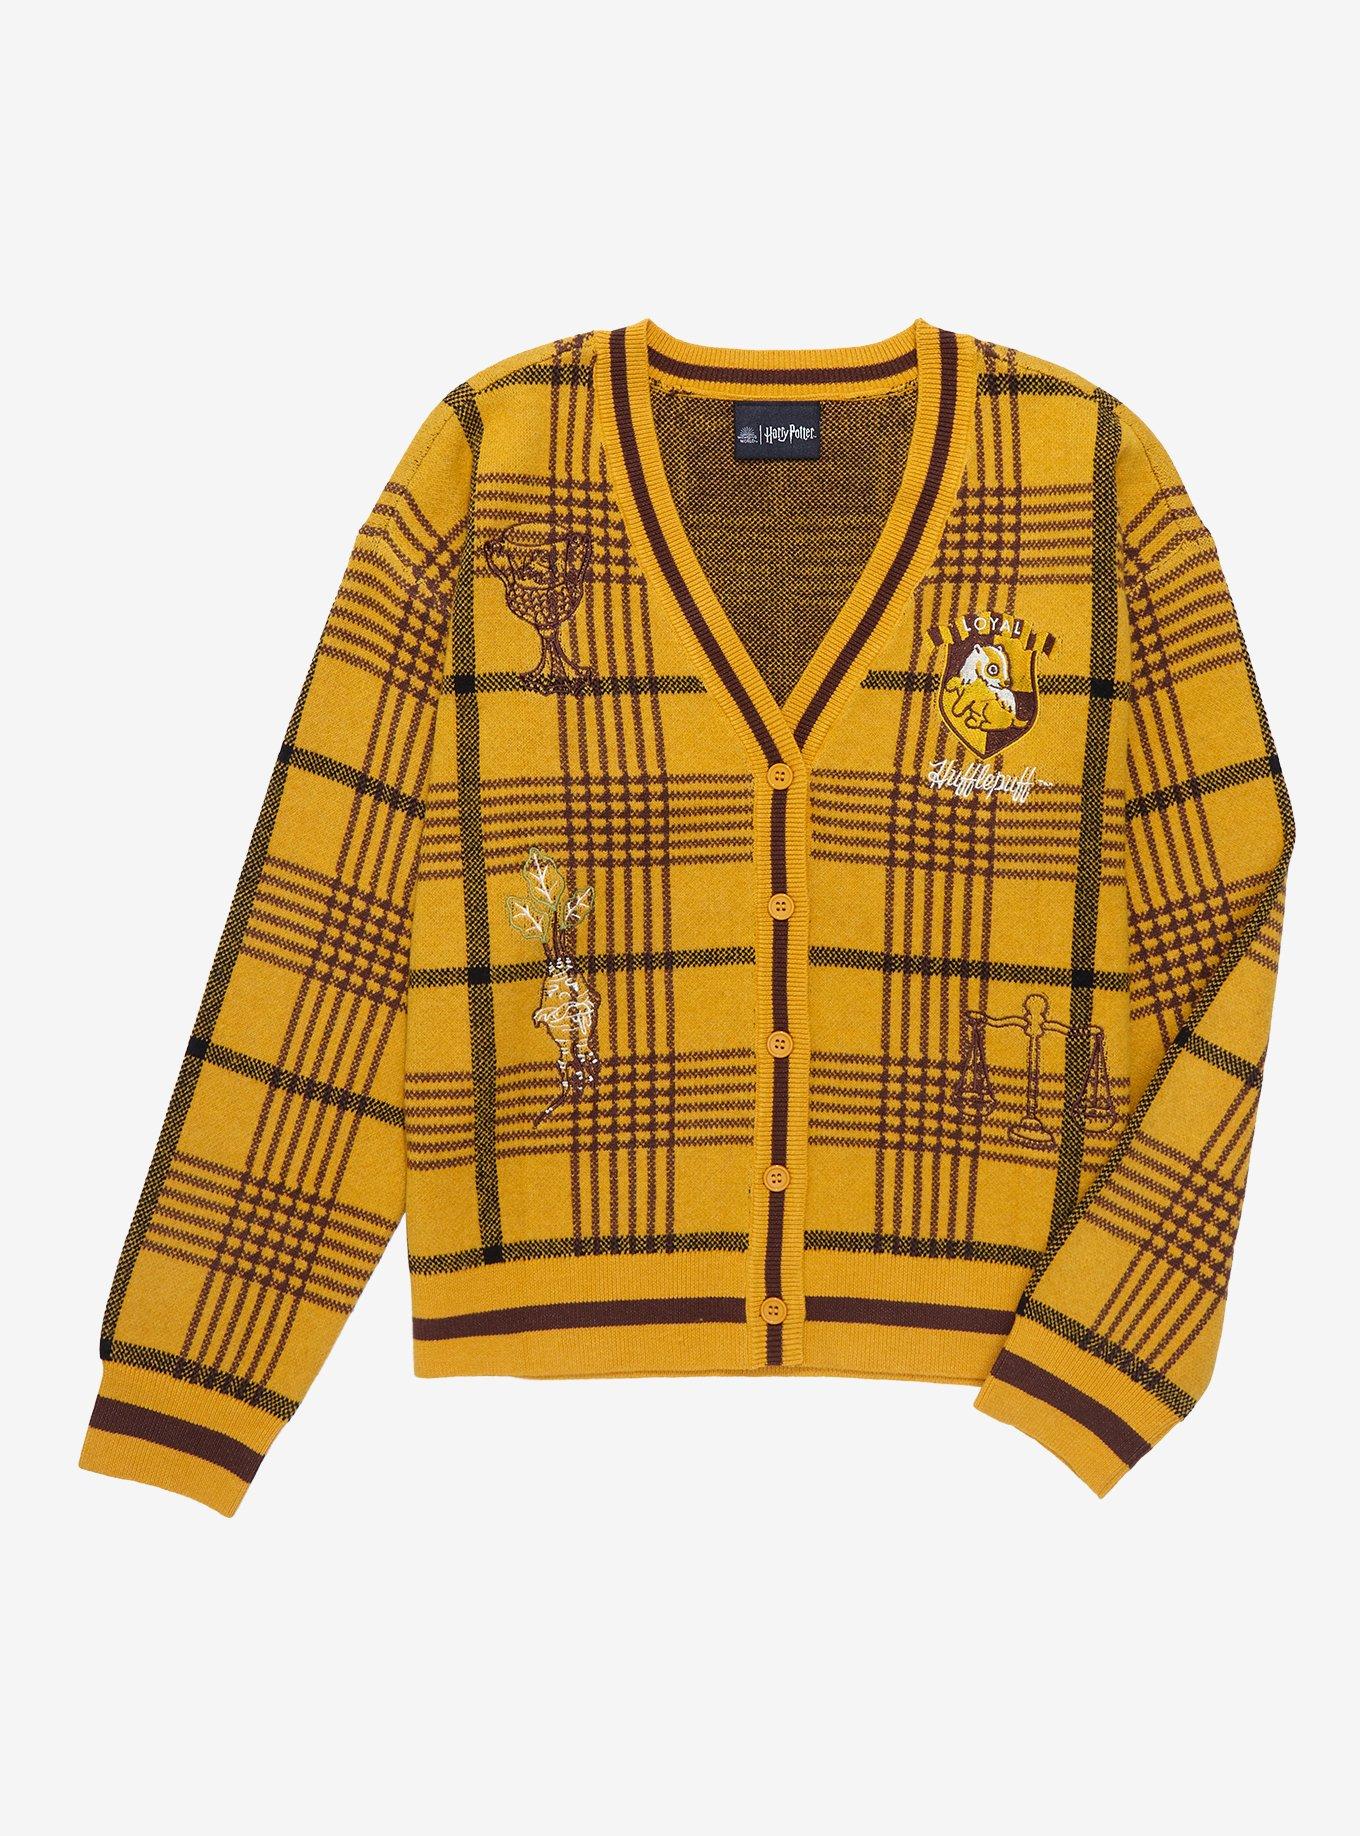 OFFICIAL Harry Potter Hufflepuff T-Shirts, Sweaters & Merch | BoxLunch